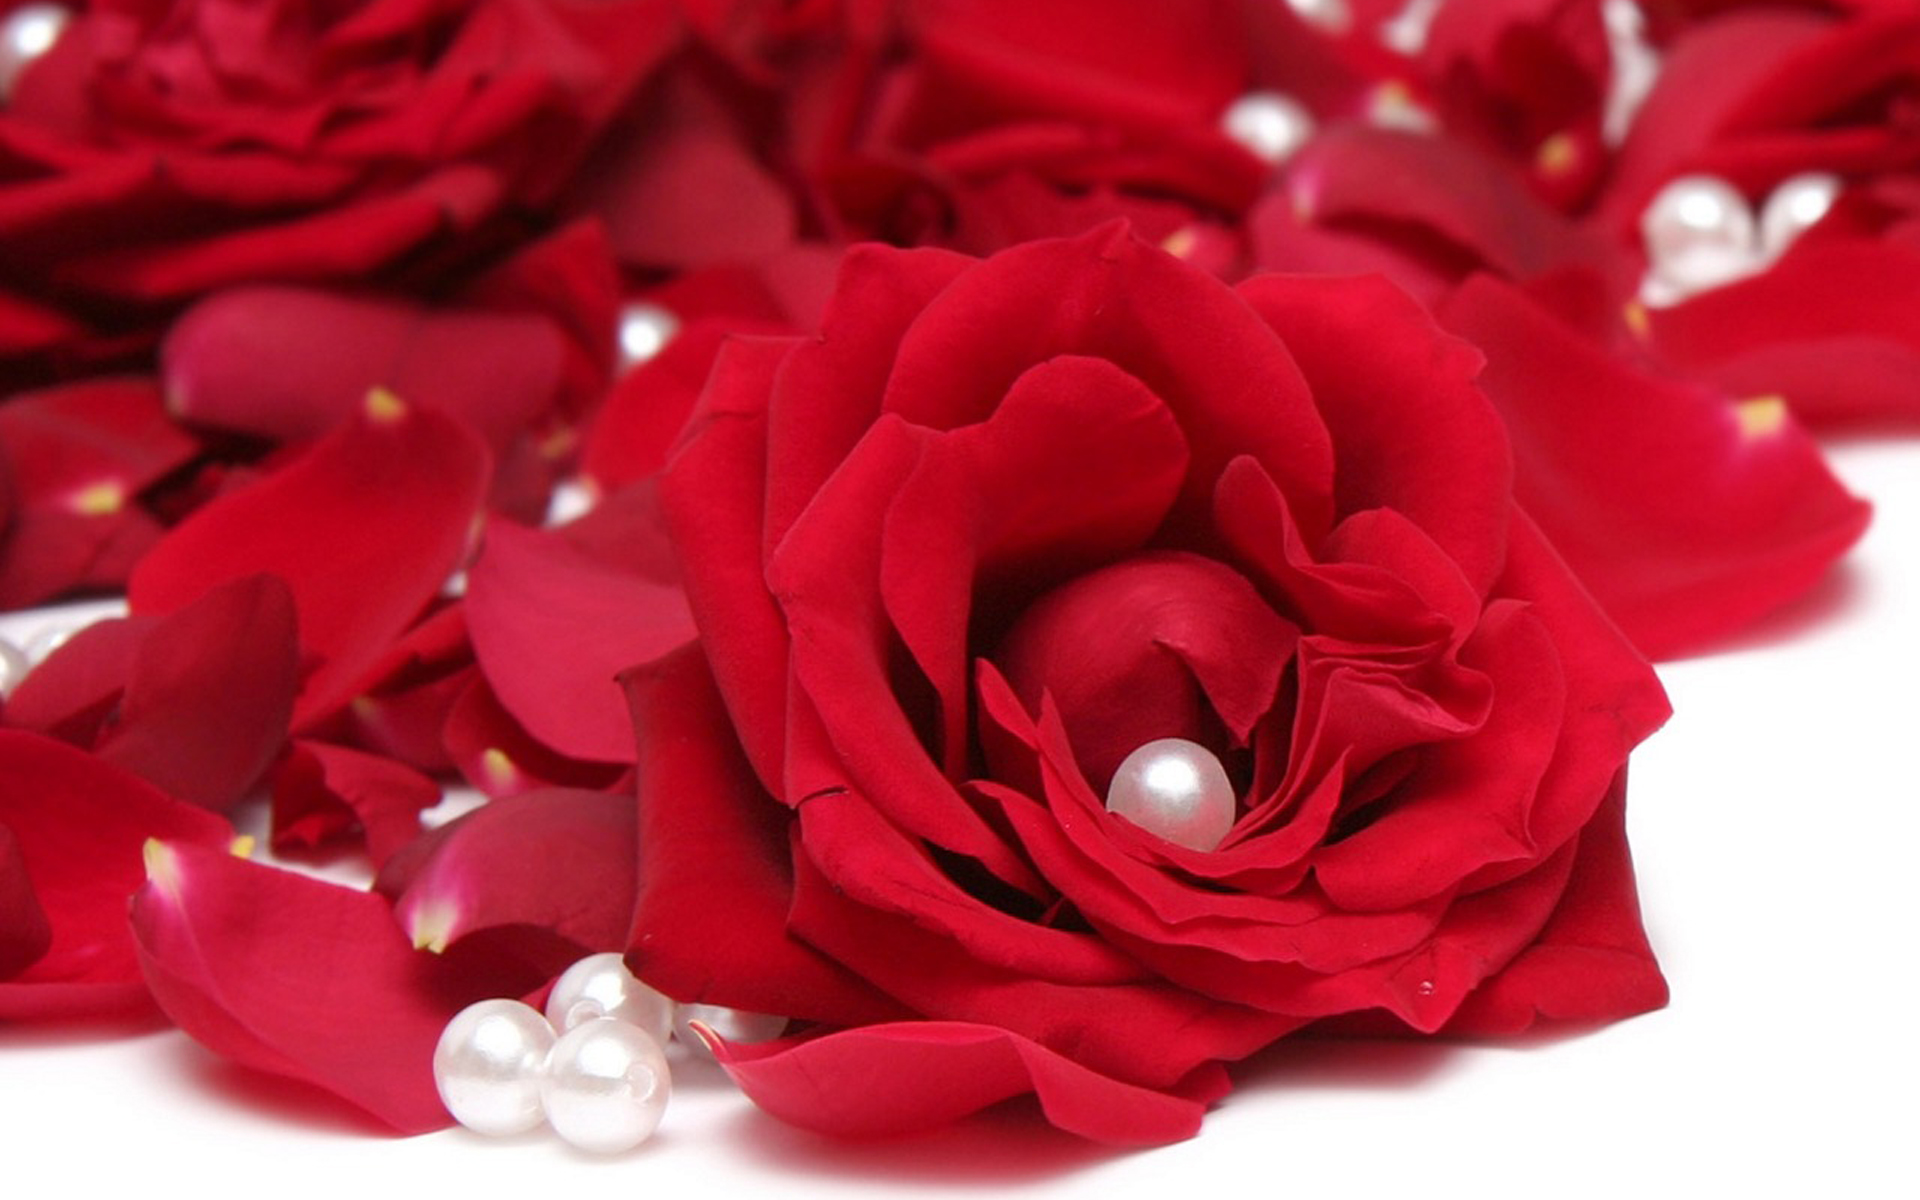 Red Rose HD Wallpaper Image Amp Pictures Becuo